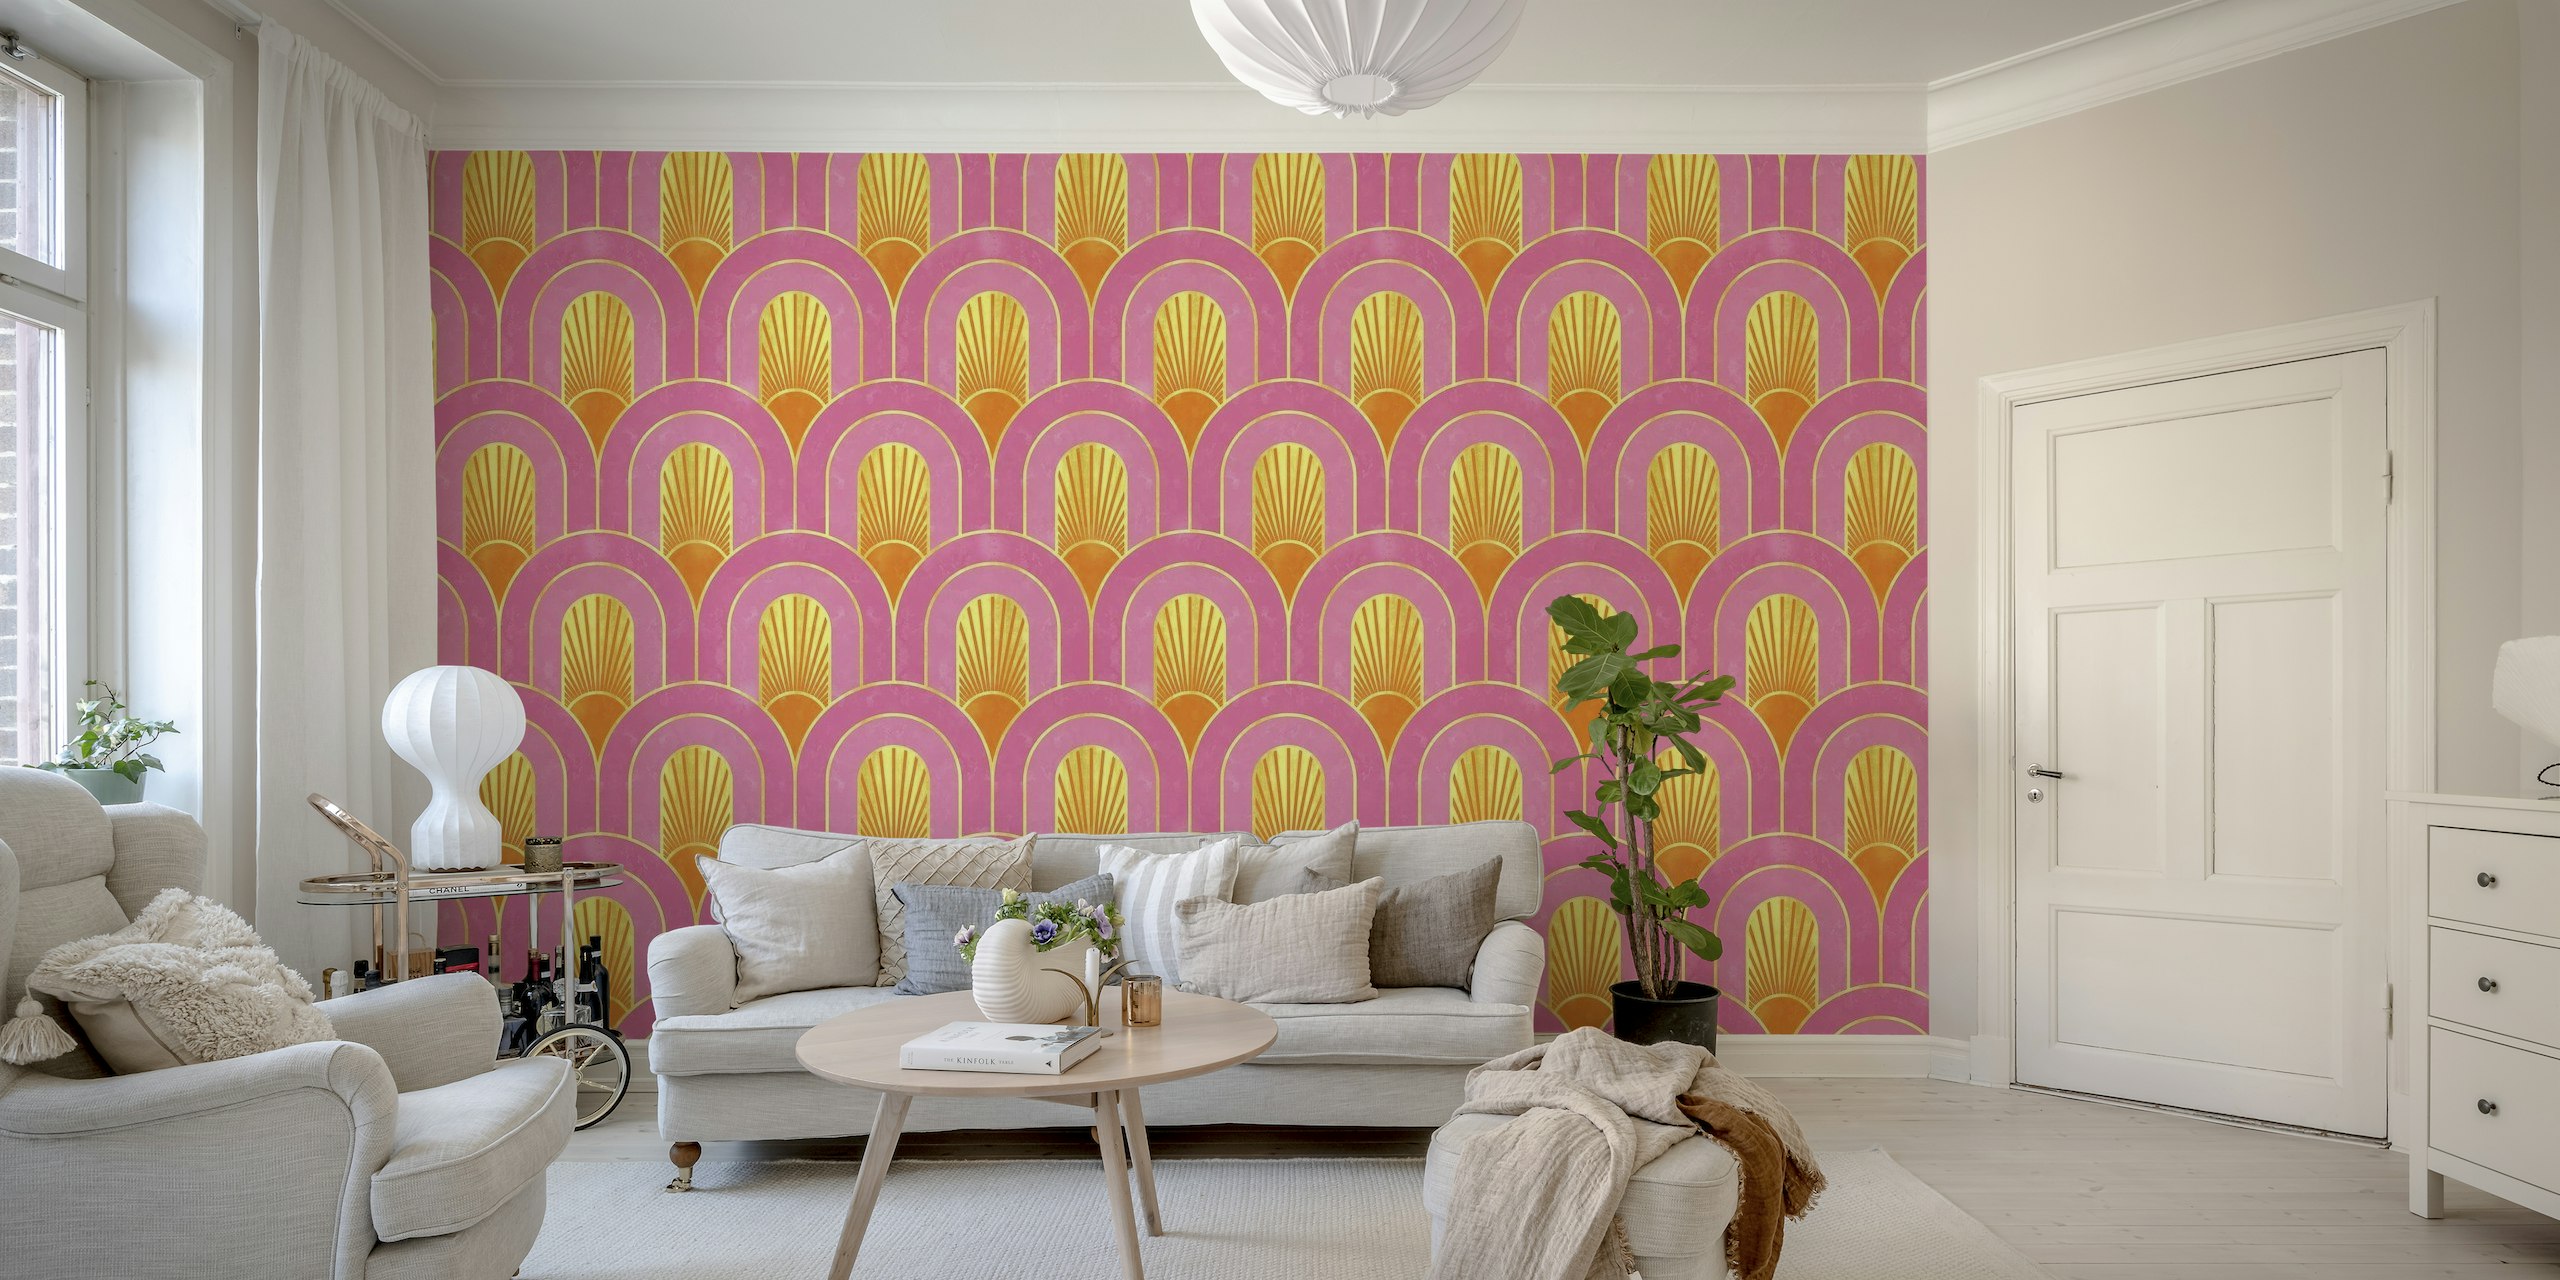 Retro Arch with Sun in Pink Orange and Gold wallpaper